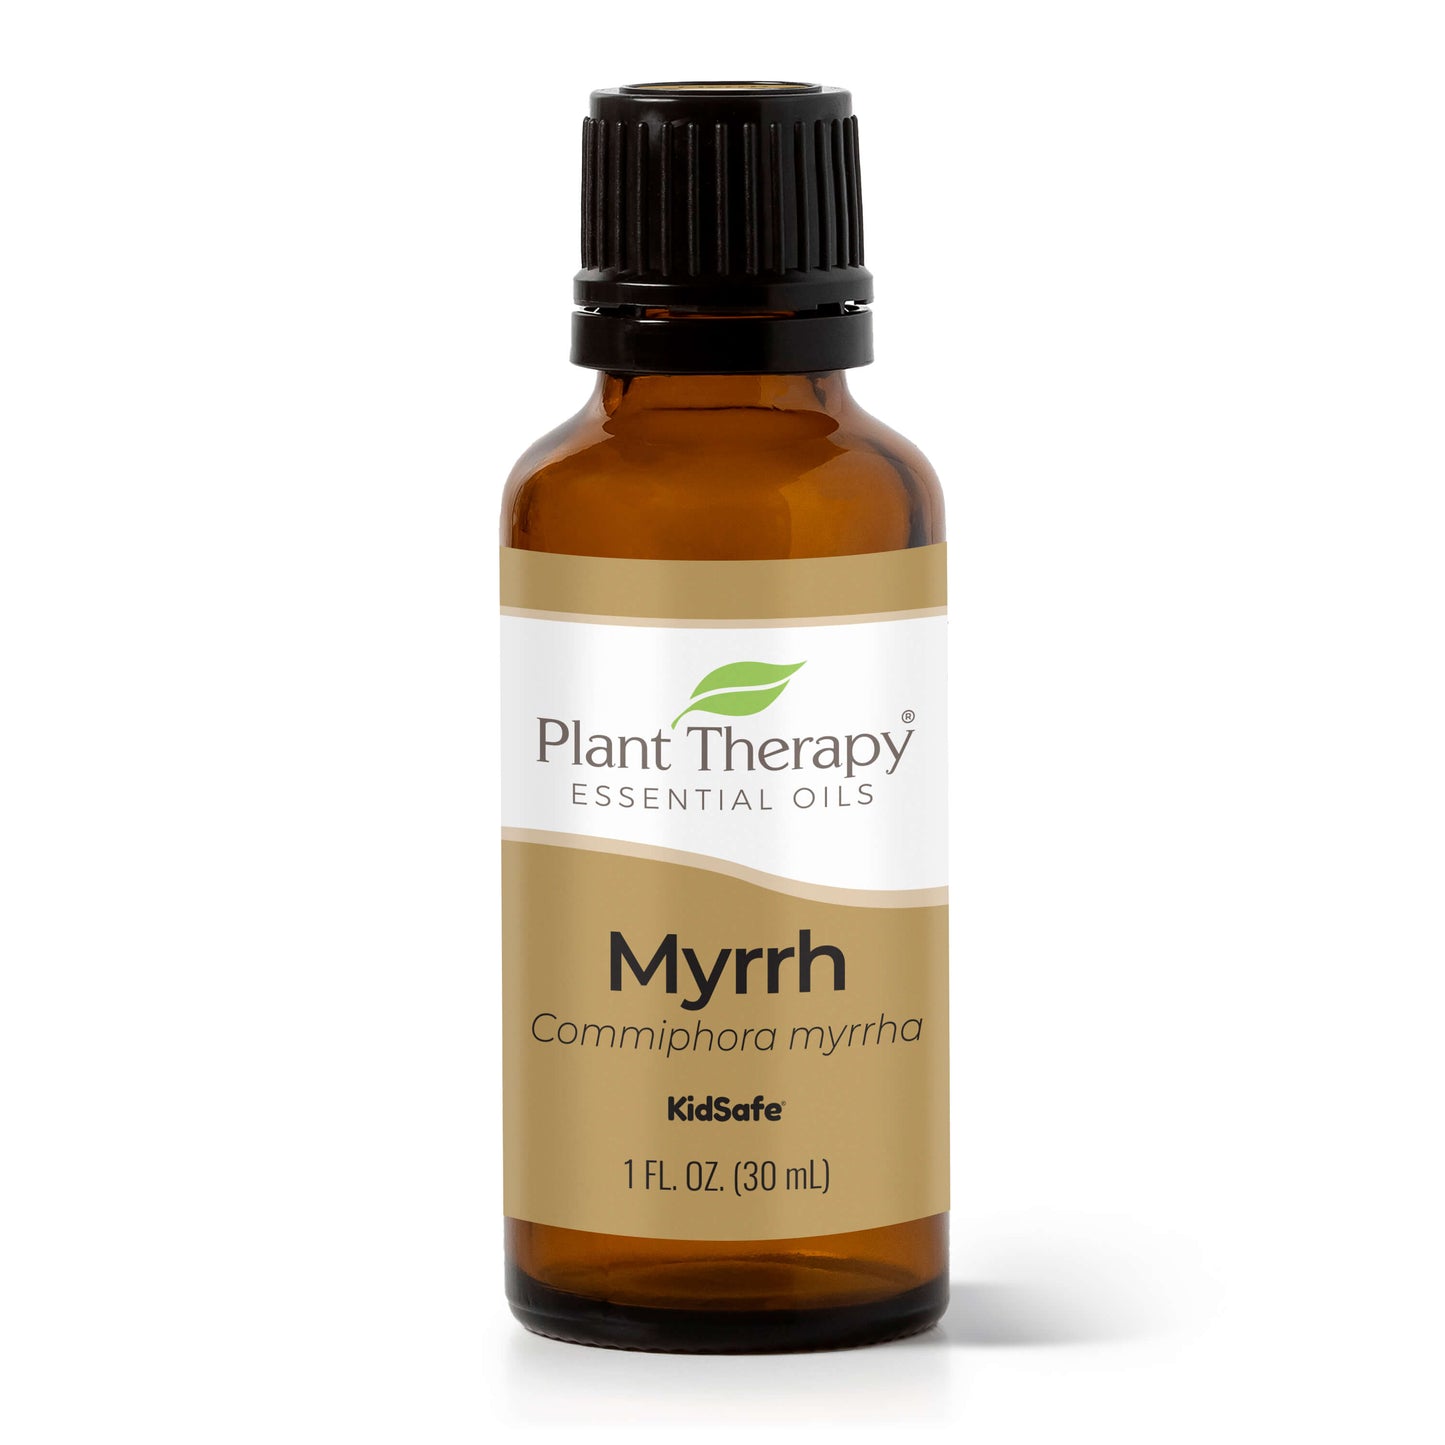 Plant Therapy Myrrh Essential Oil 100% Pure Undiluted Natural Aromatherapy Therapeutic Grade 10 ml (1/3 oz)